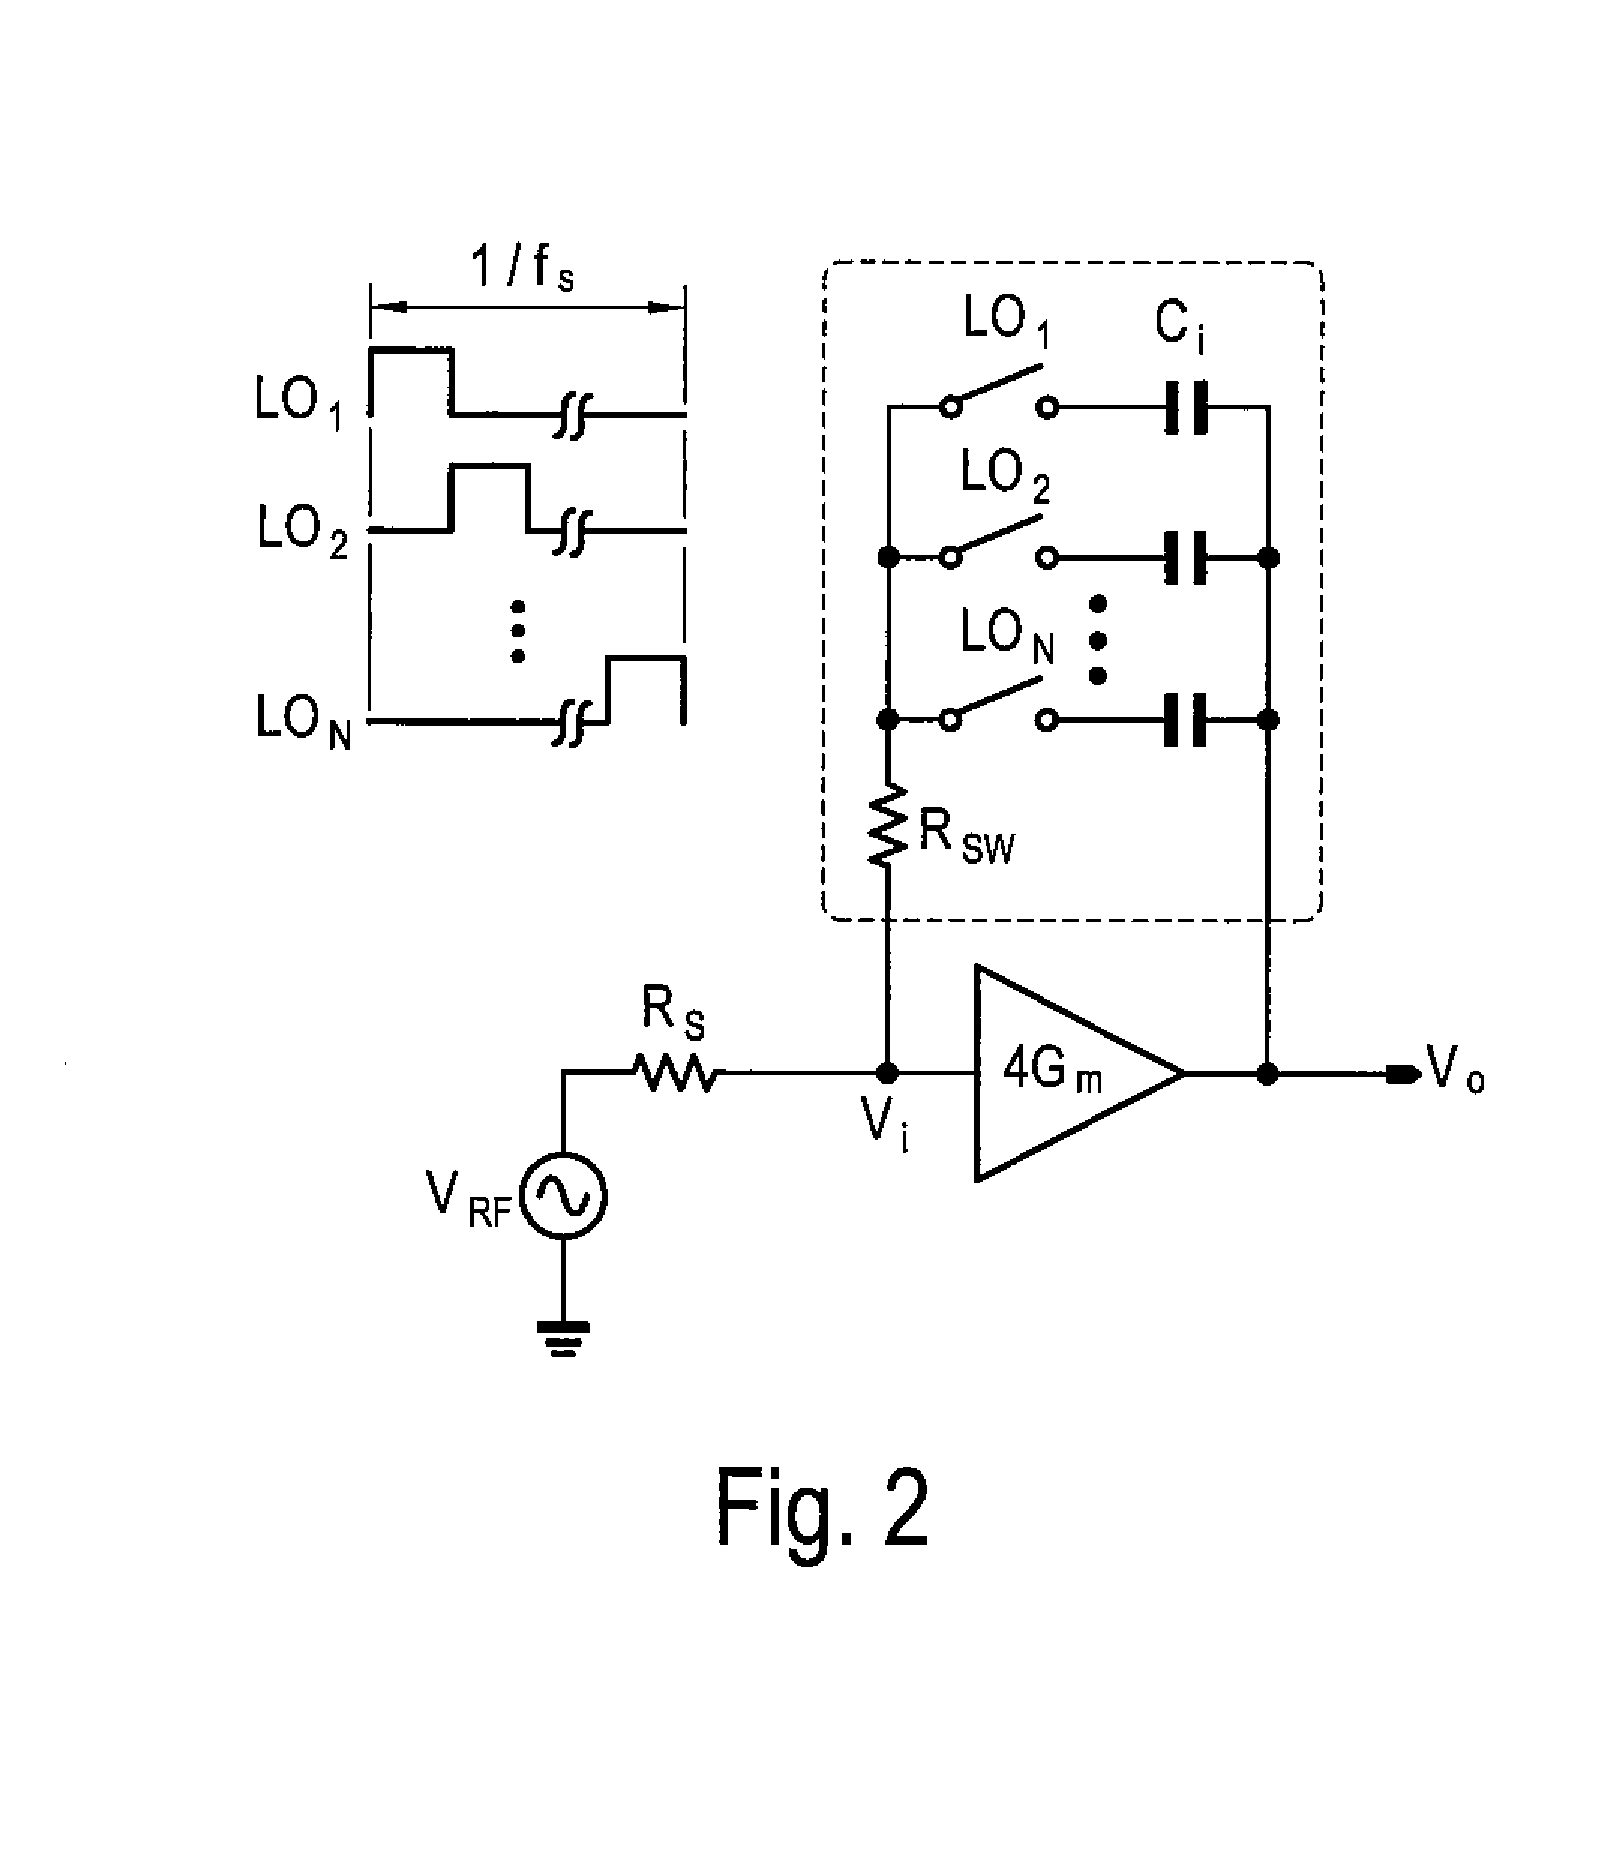 Radio-frequency-to-baseband function-reuse receiver with shared amplifiers for common-mode and differential-mode amplification